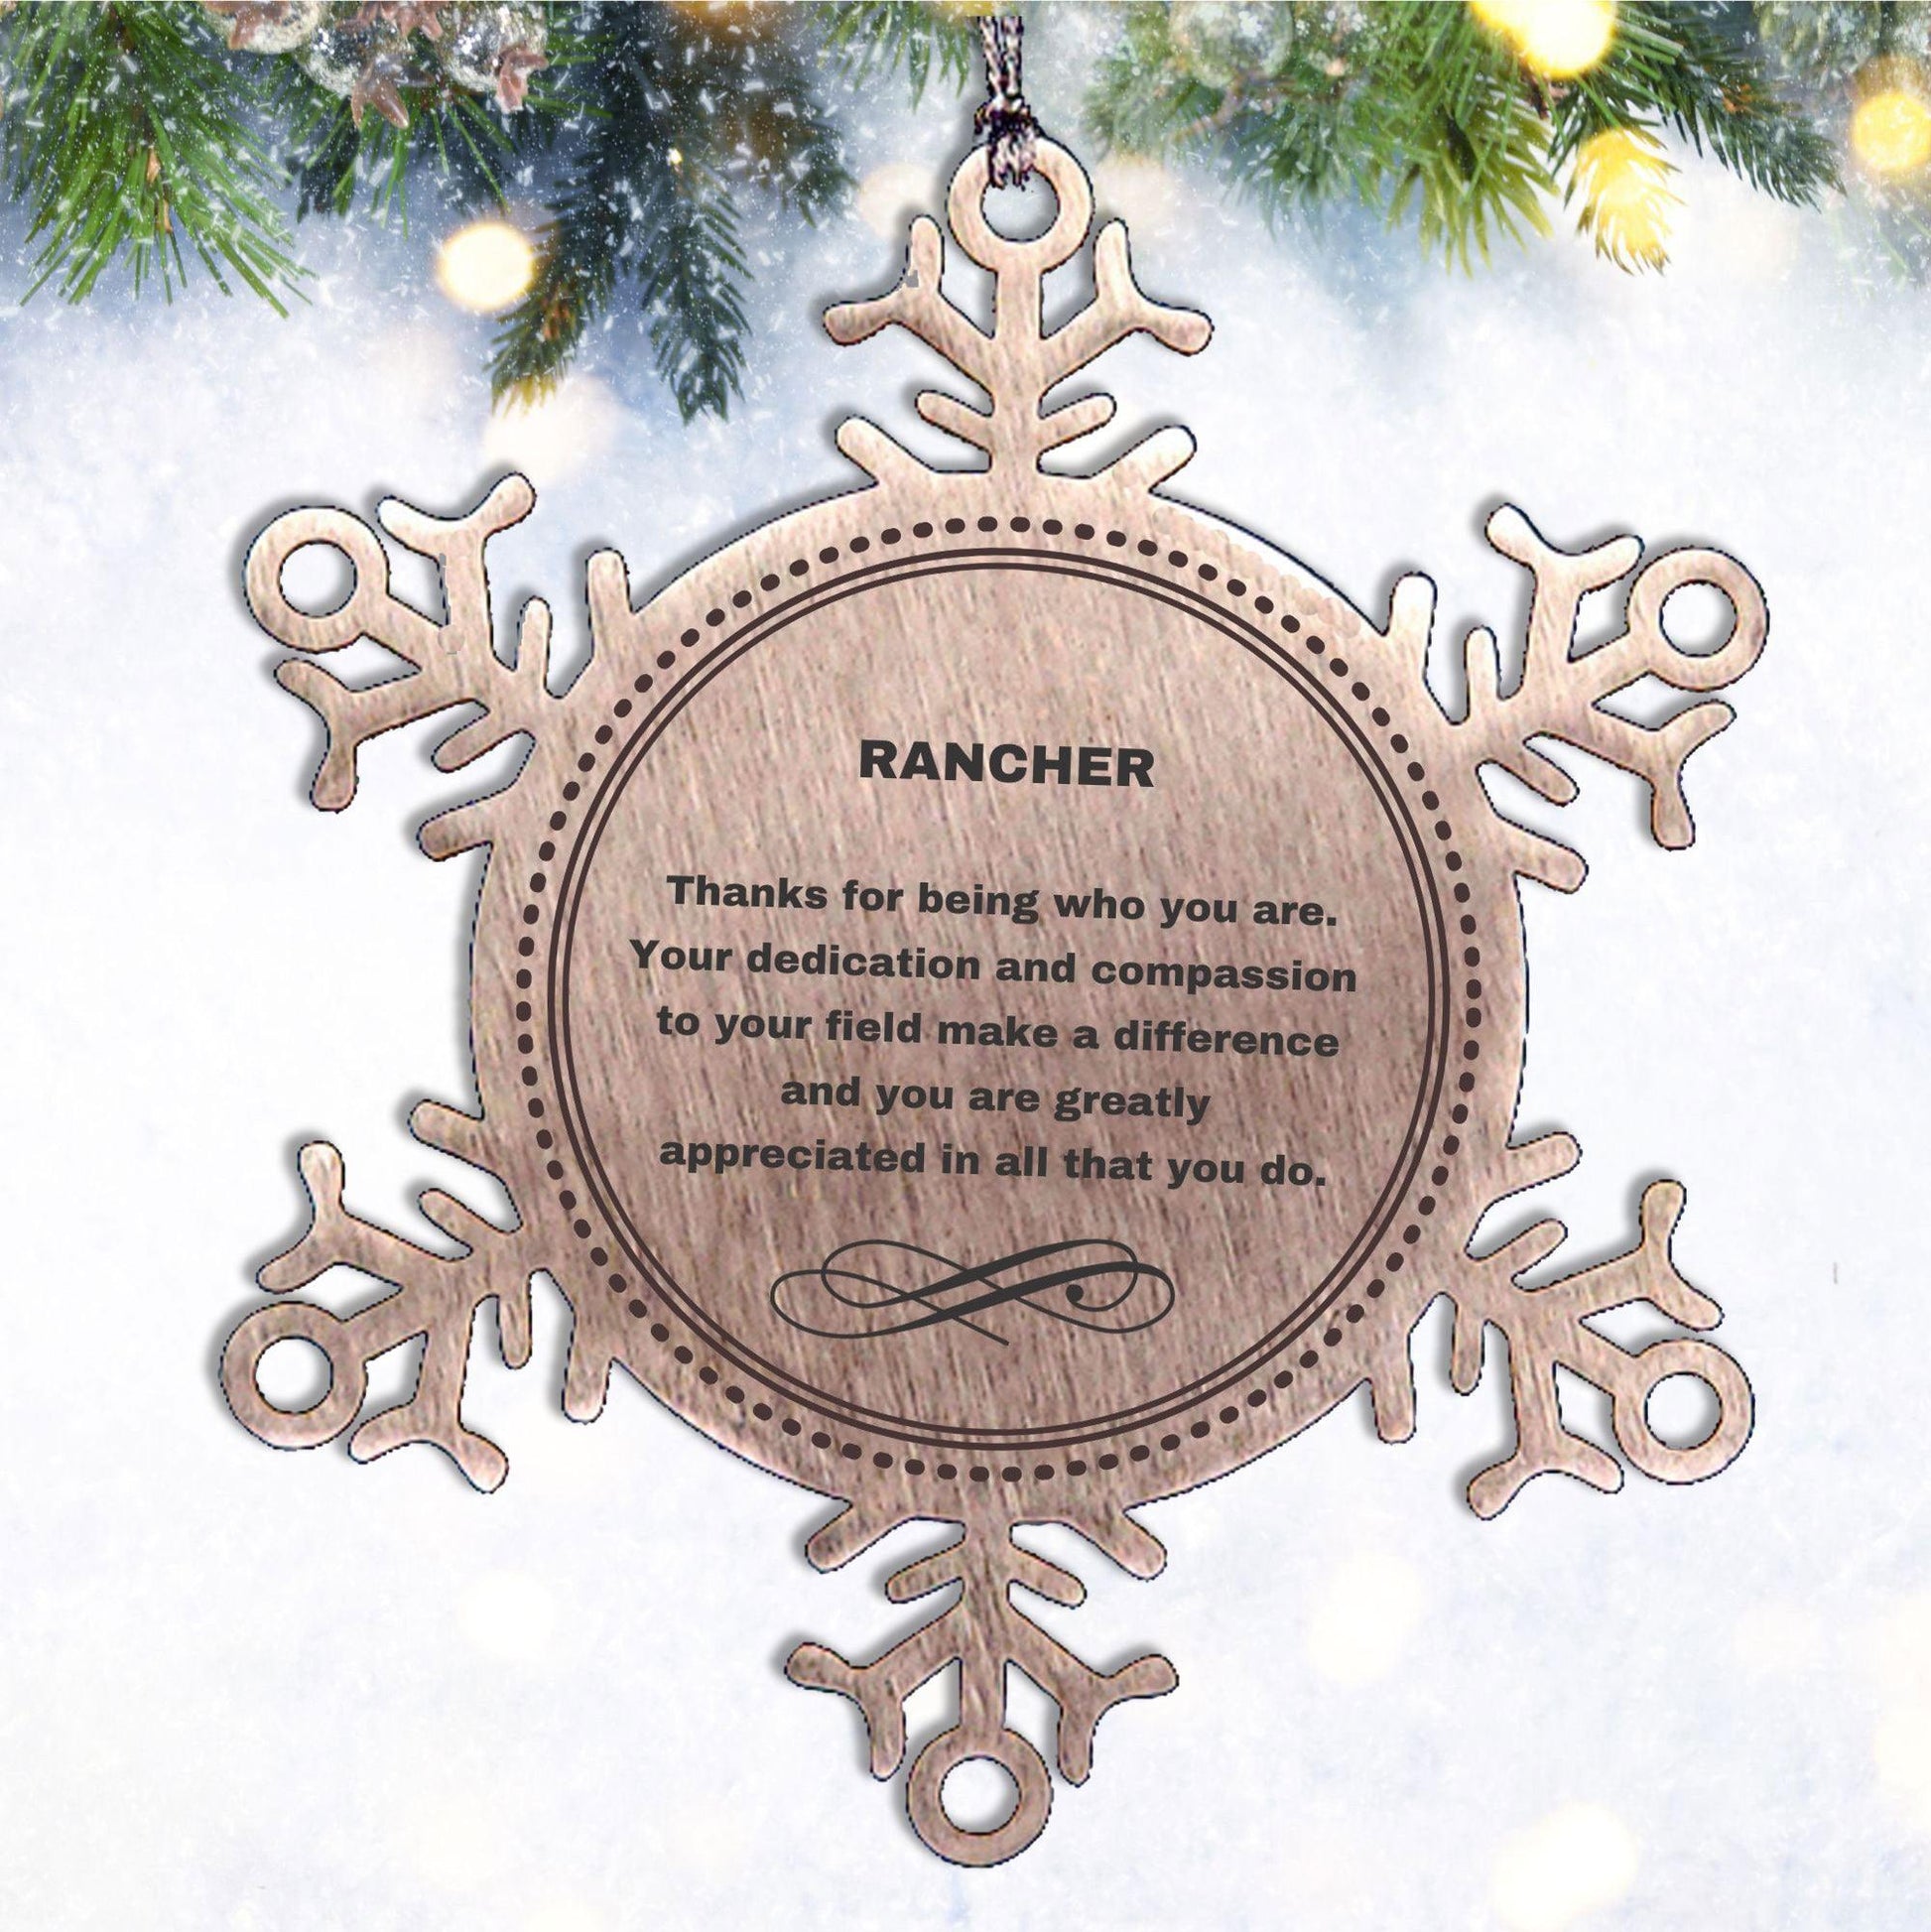 Rancher Snowflake Ornament - Thanks for being who you are - Birthday Christmas Jewelry Gifts Coworkers Colleague Boss - Mallard Moon Gift Shop